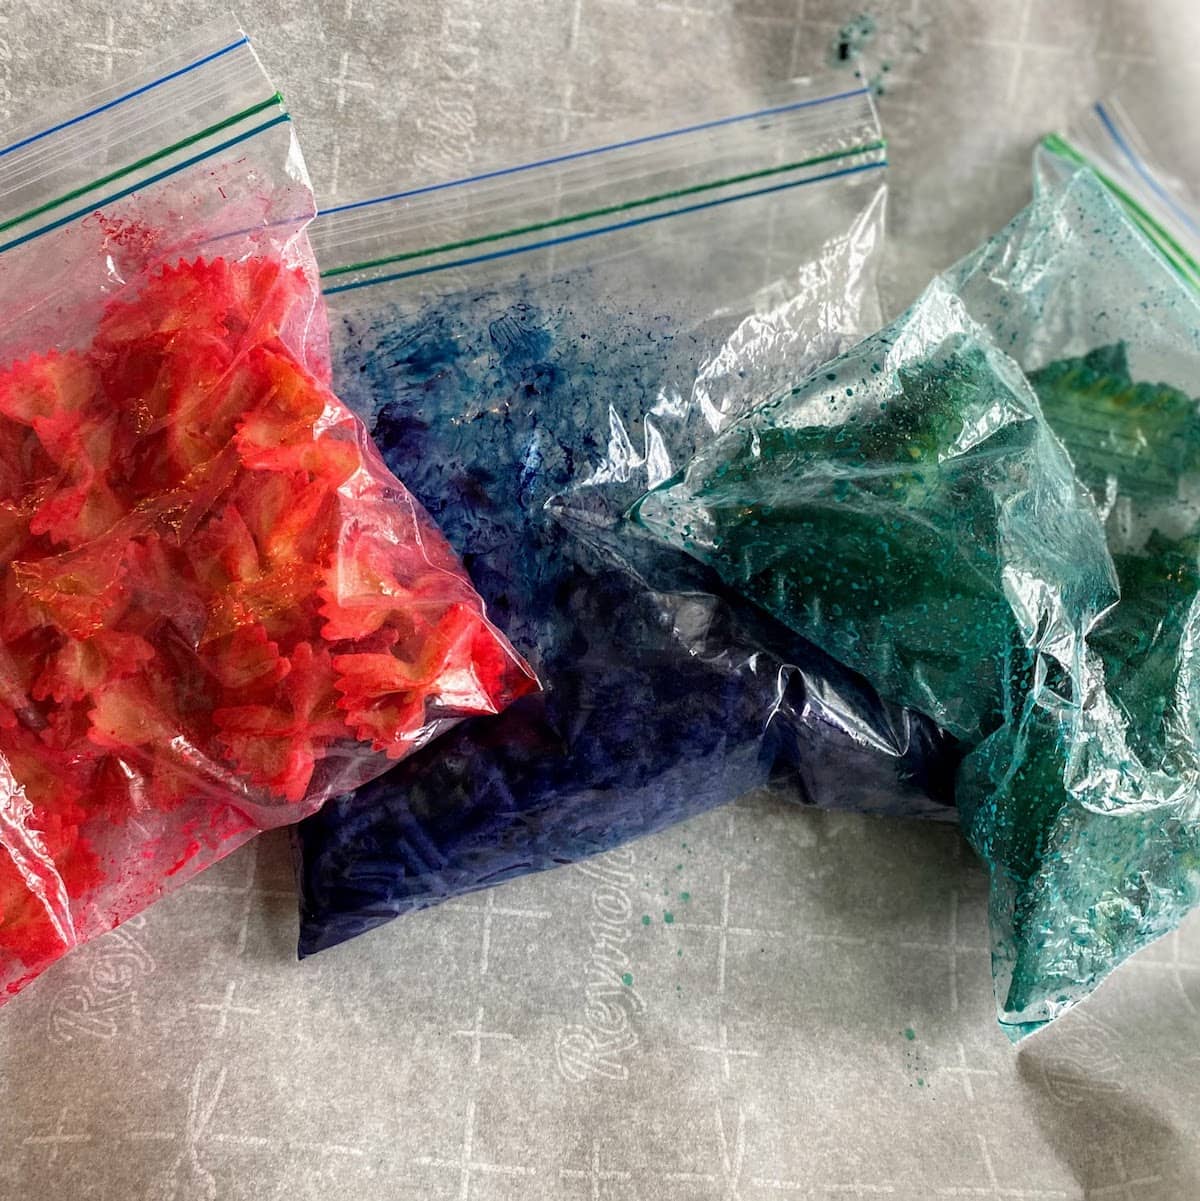 red, blue and green dyed pasta in bags